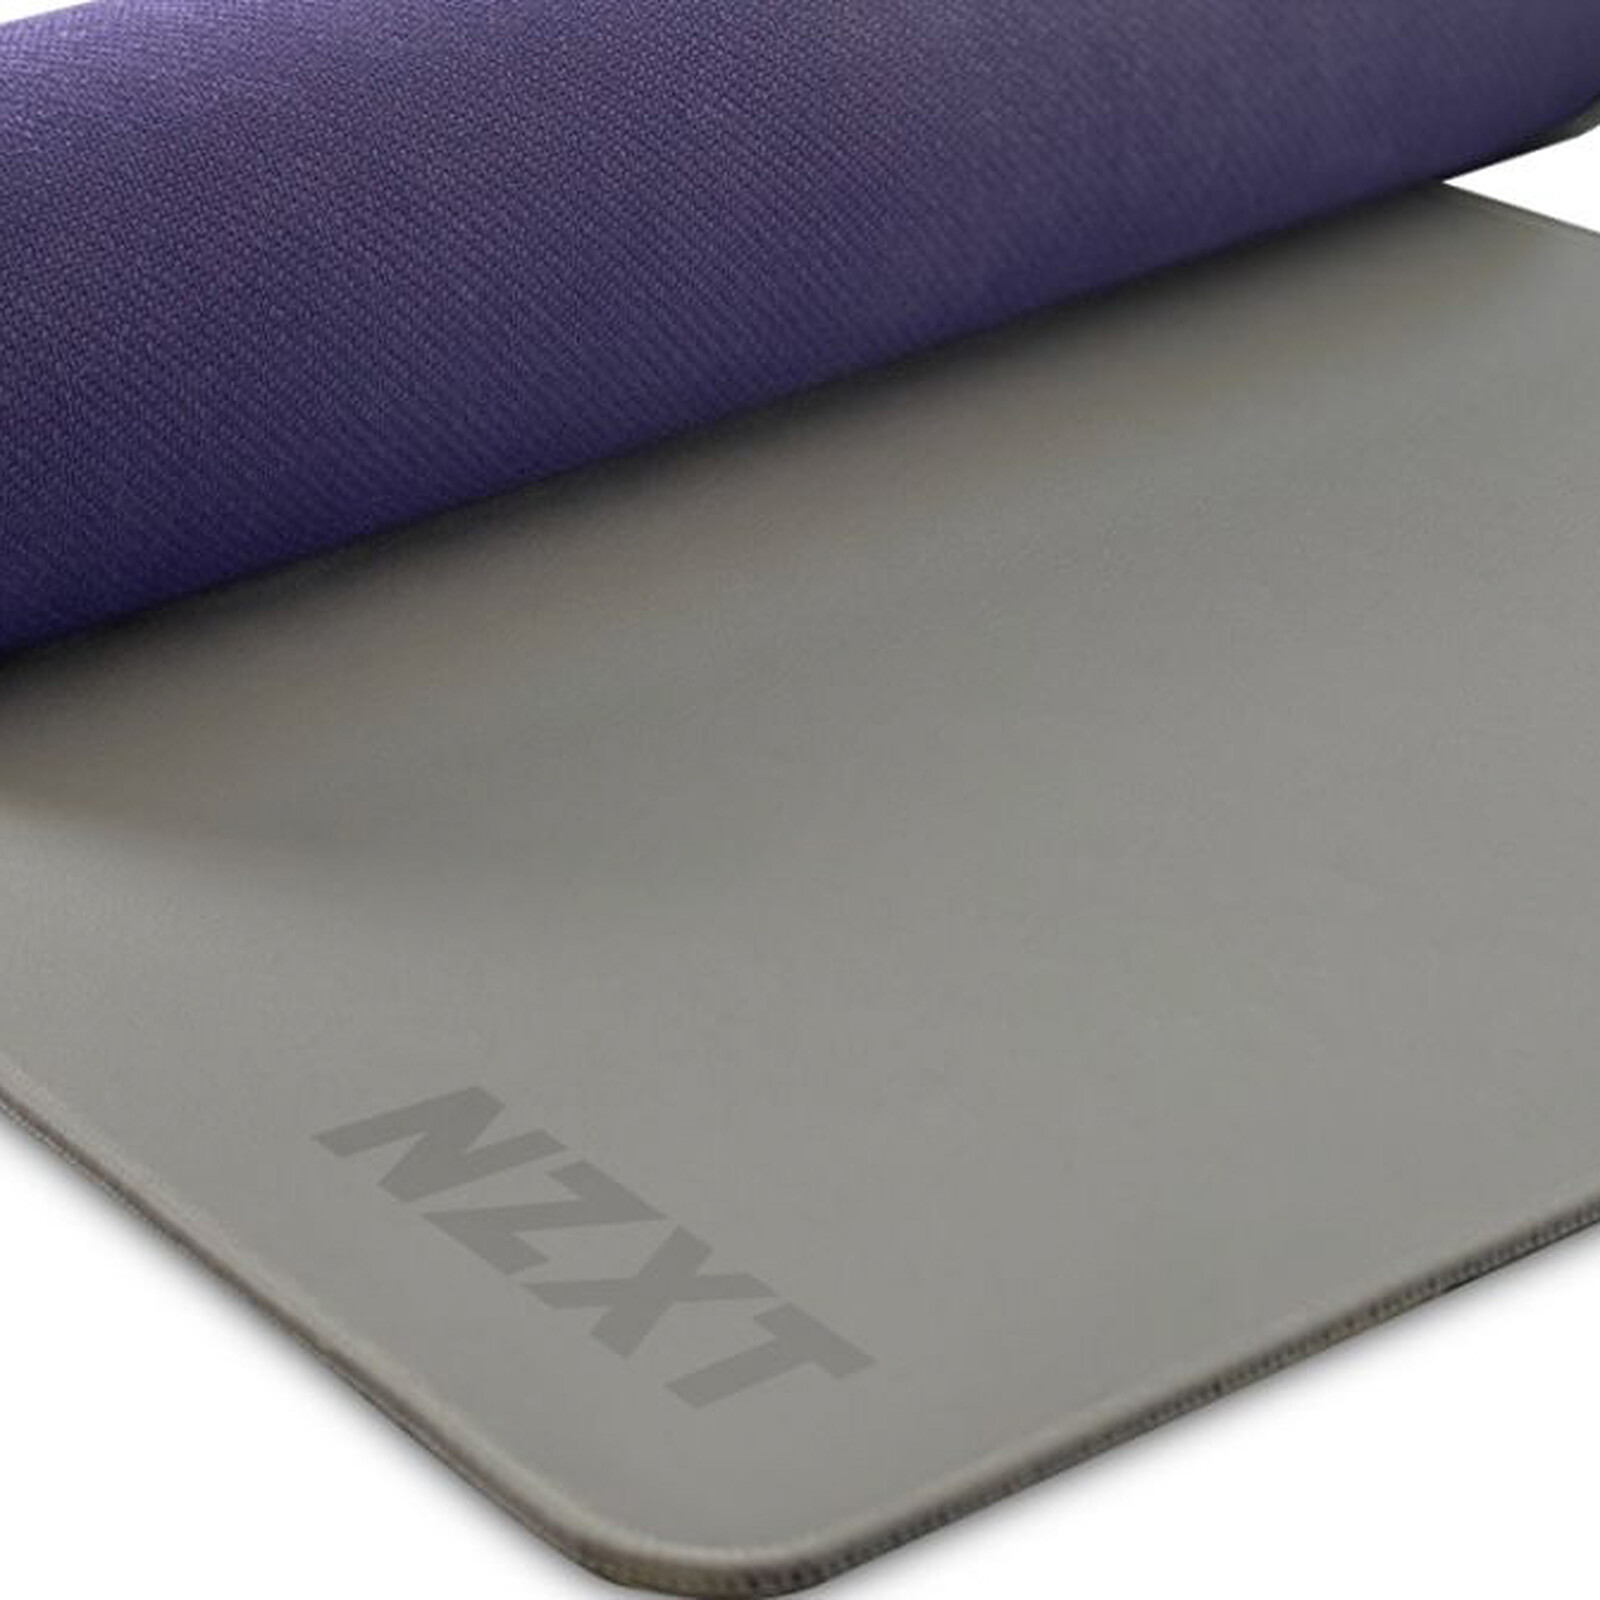 NZXT MMP400 Mouse Pad (Matte White) MM-SMSSP-WW B&H Photo Video